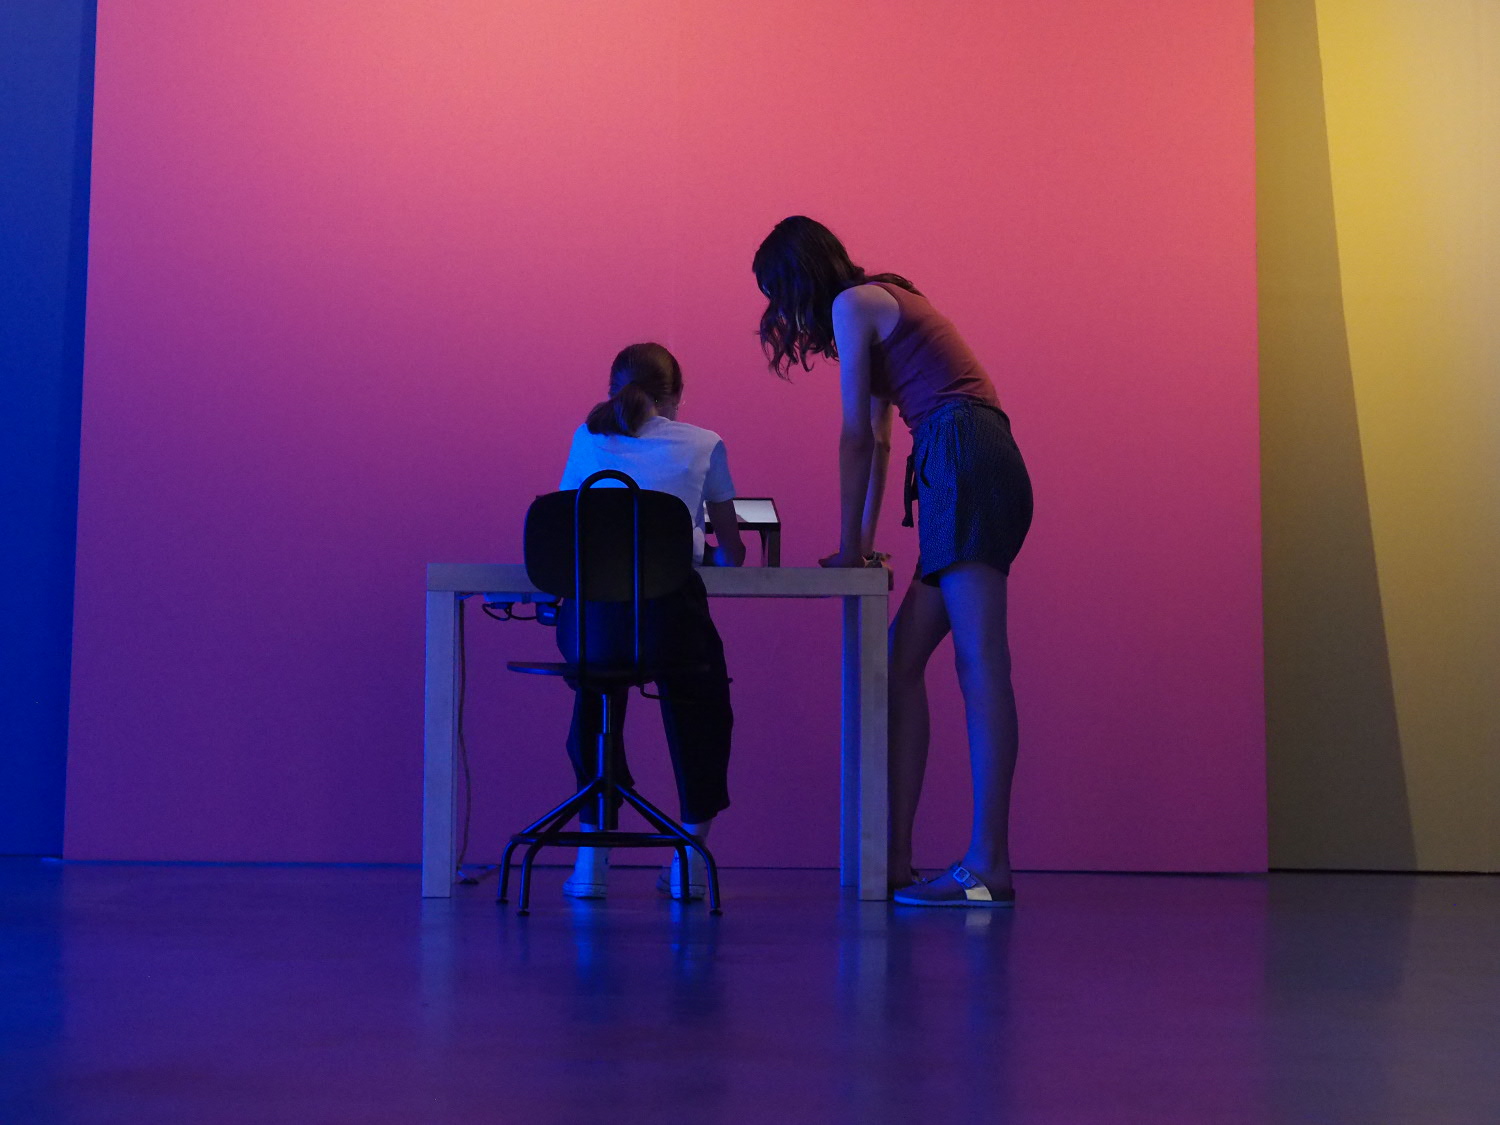  Two children are photographed from the back in a blue lit exhibition space. One of them is sitting, the other one is standing in front of a tablet.